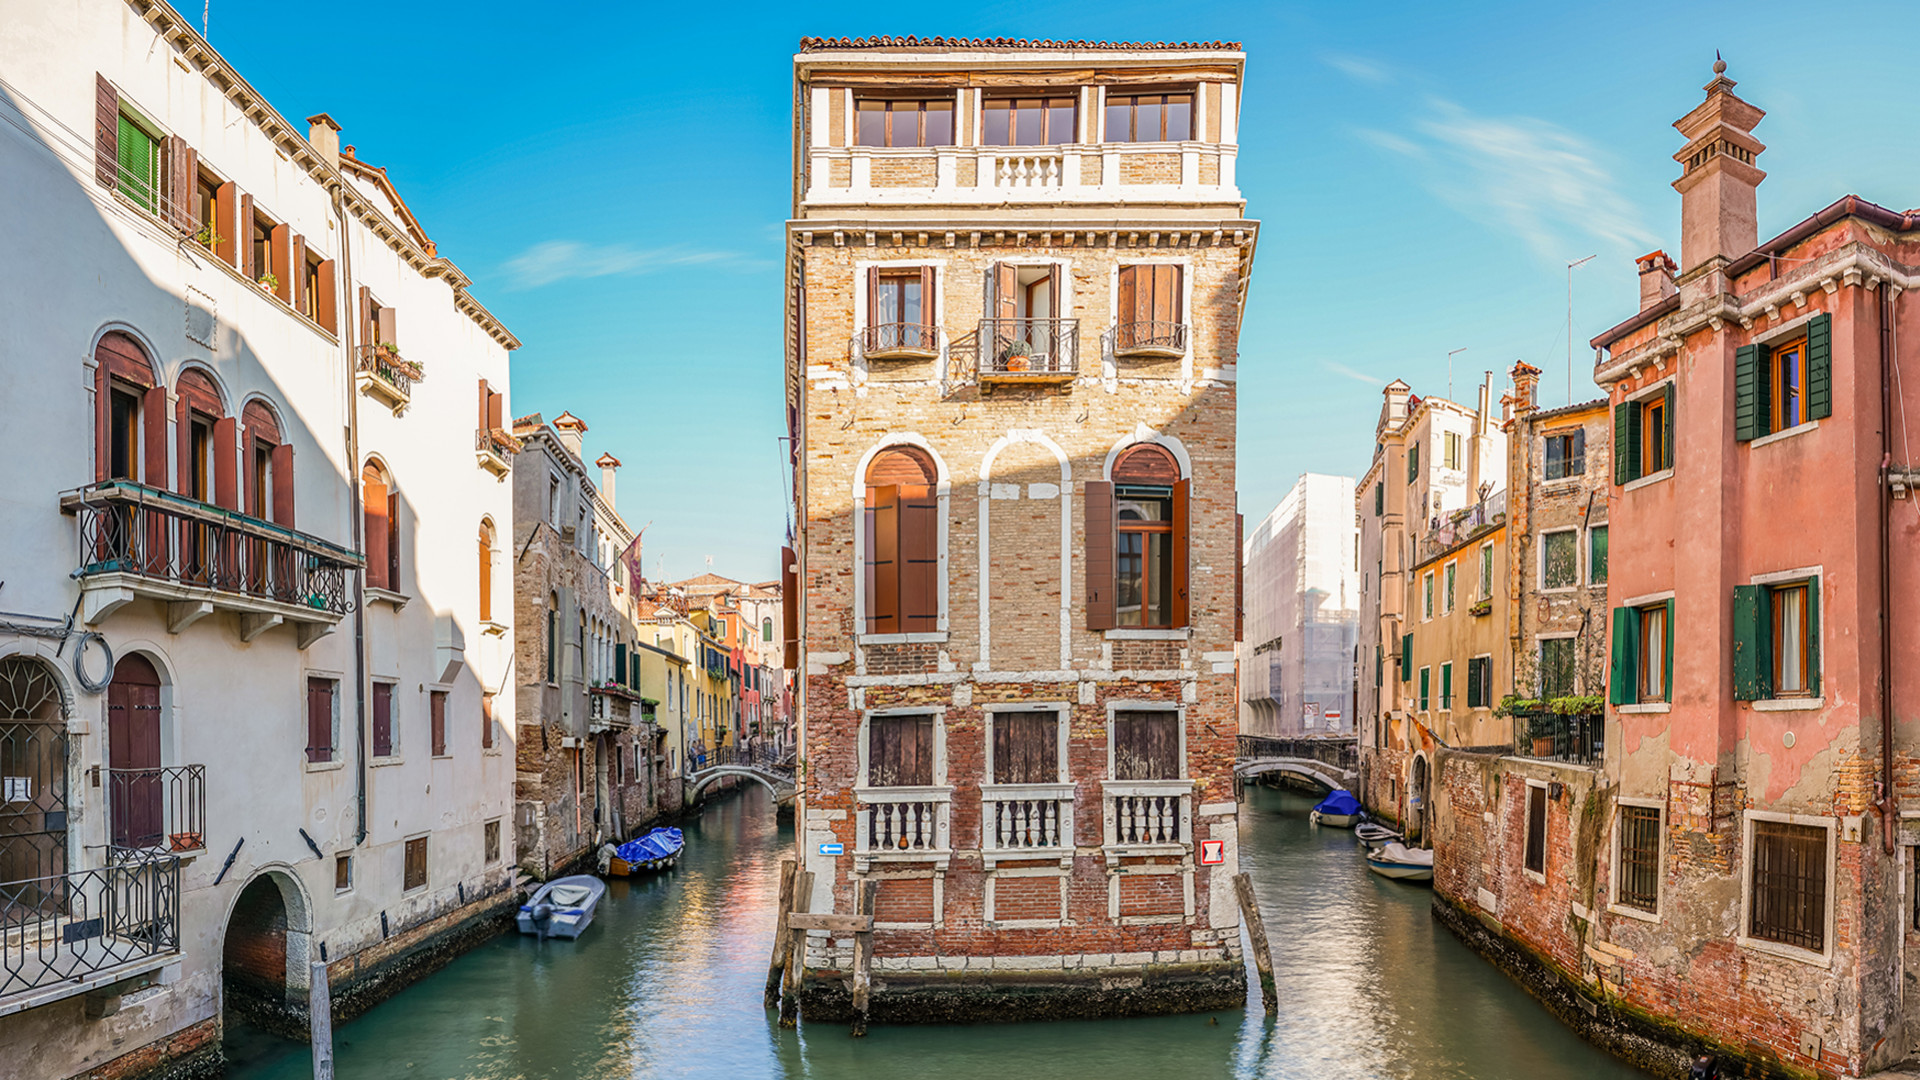 Just Landed The water in Venice's canals is clear… but there were